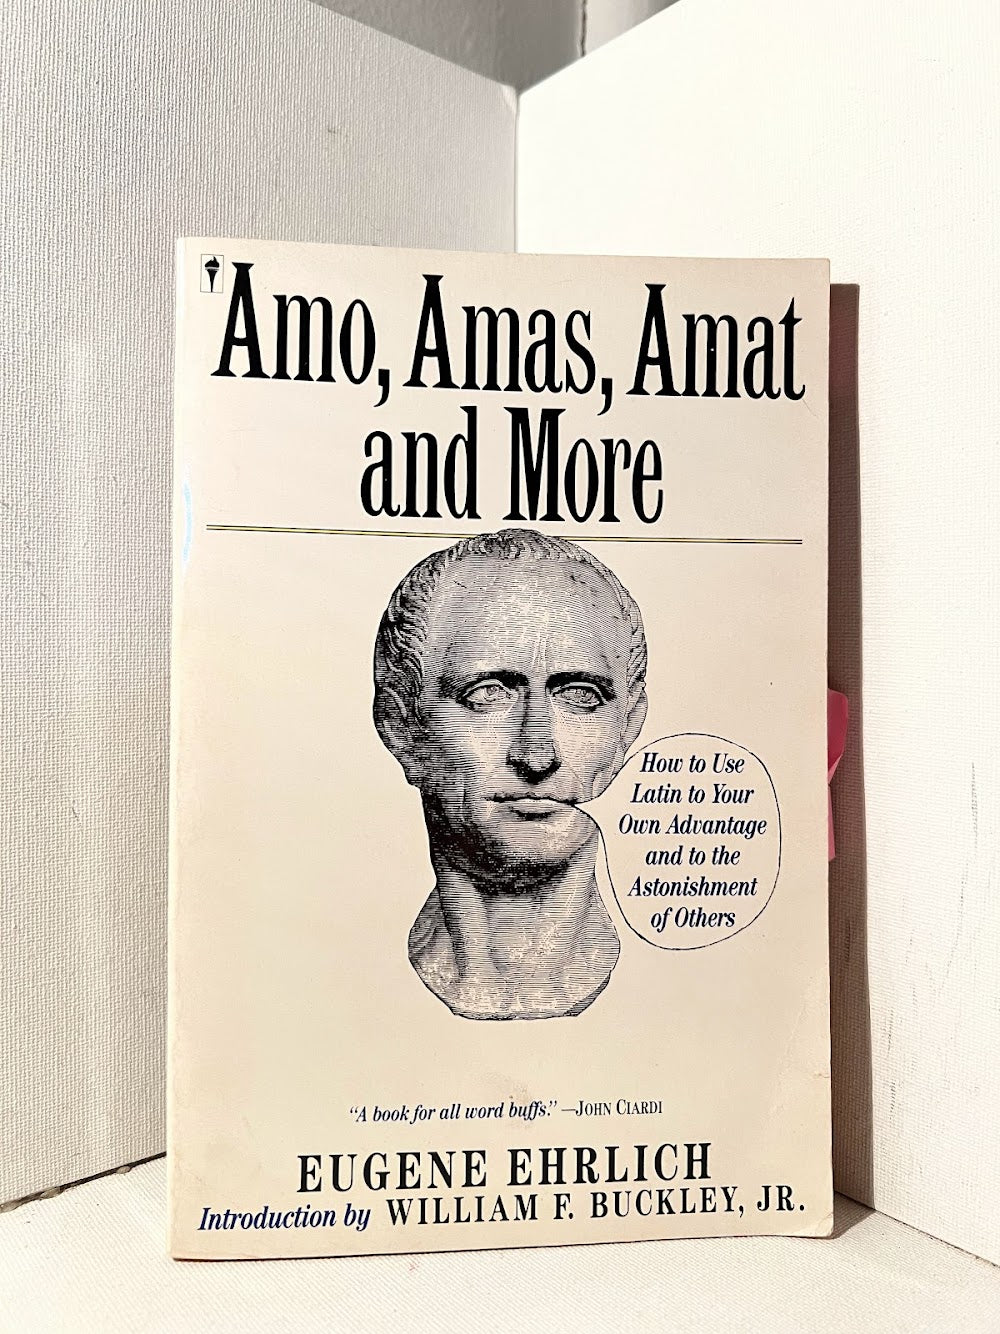 Amo, Amas, Amat and More by Eugene Ehrlich